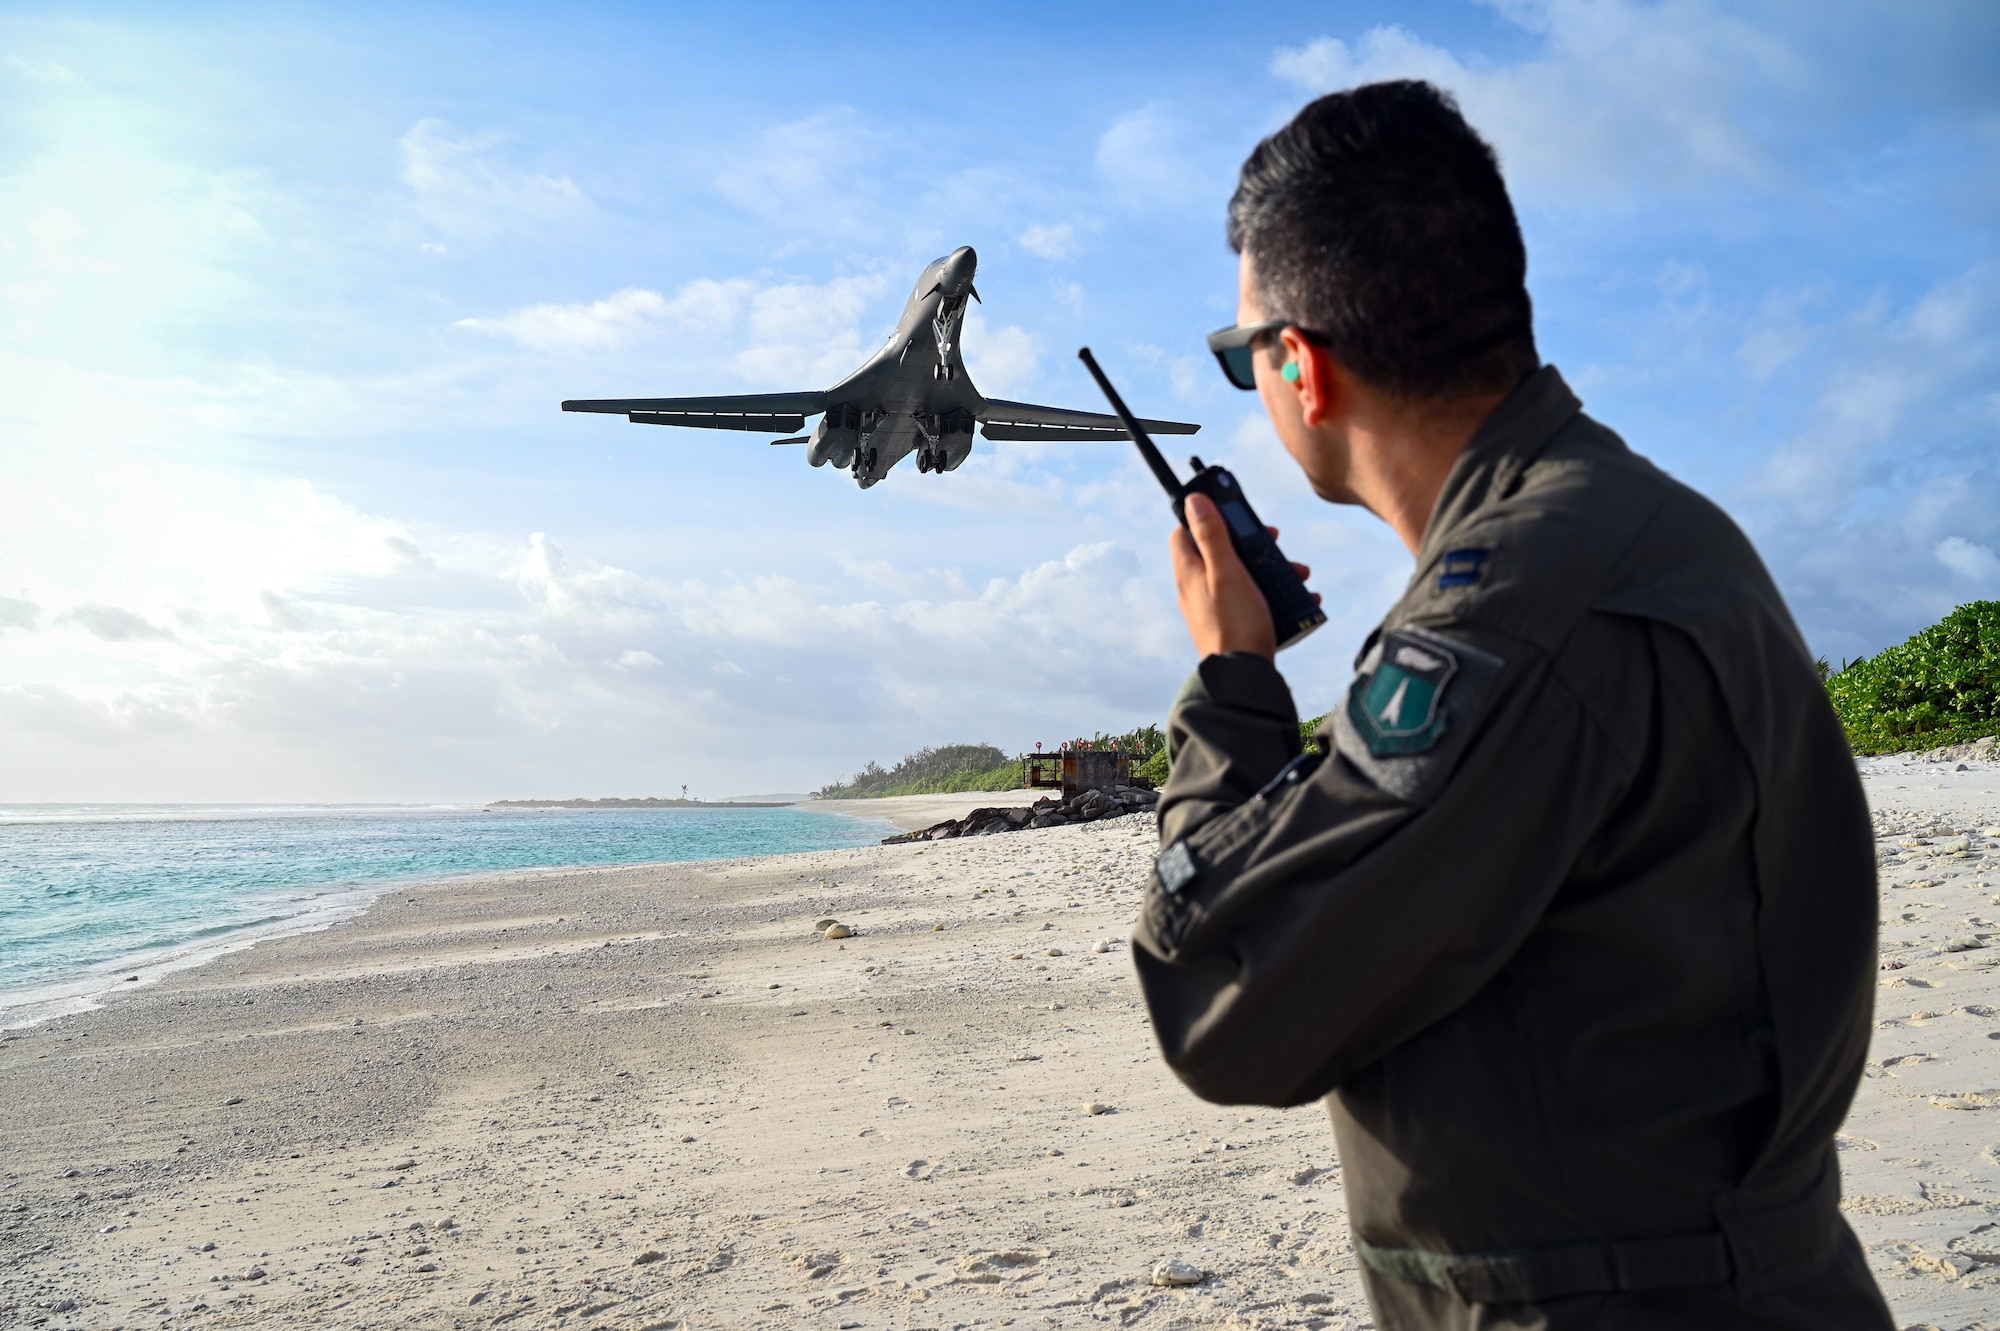 Capt. Orr Genish, 37th Bomb Squadron weapons systems officer, uses a land mobile radio as he watches a B-1B Lancer land